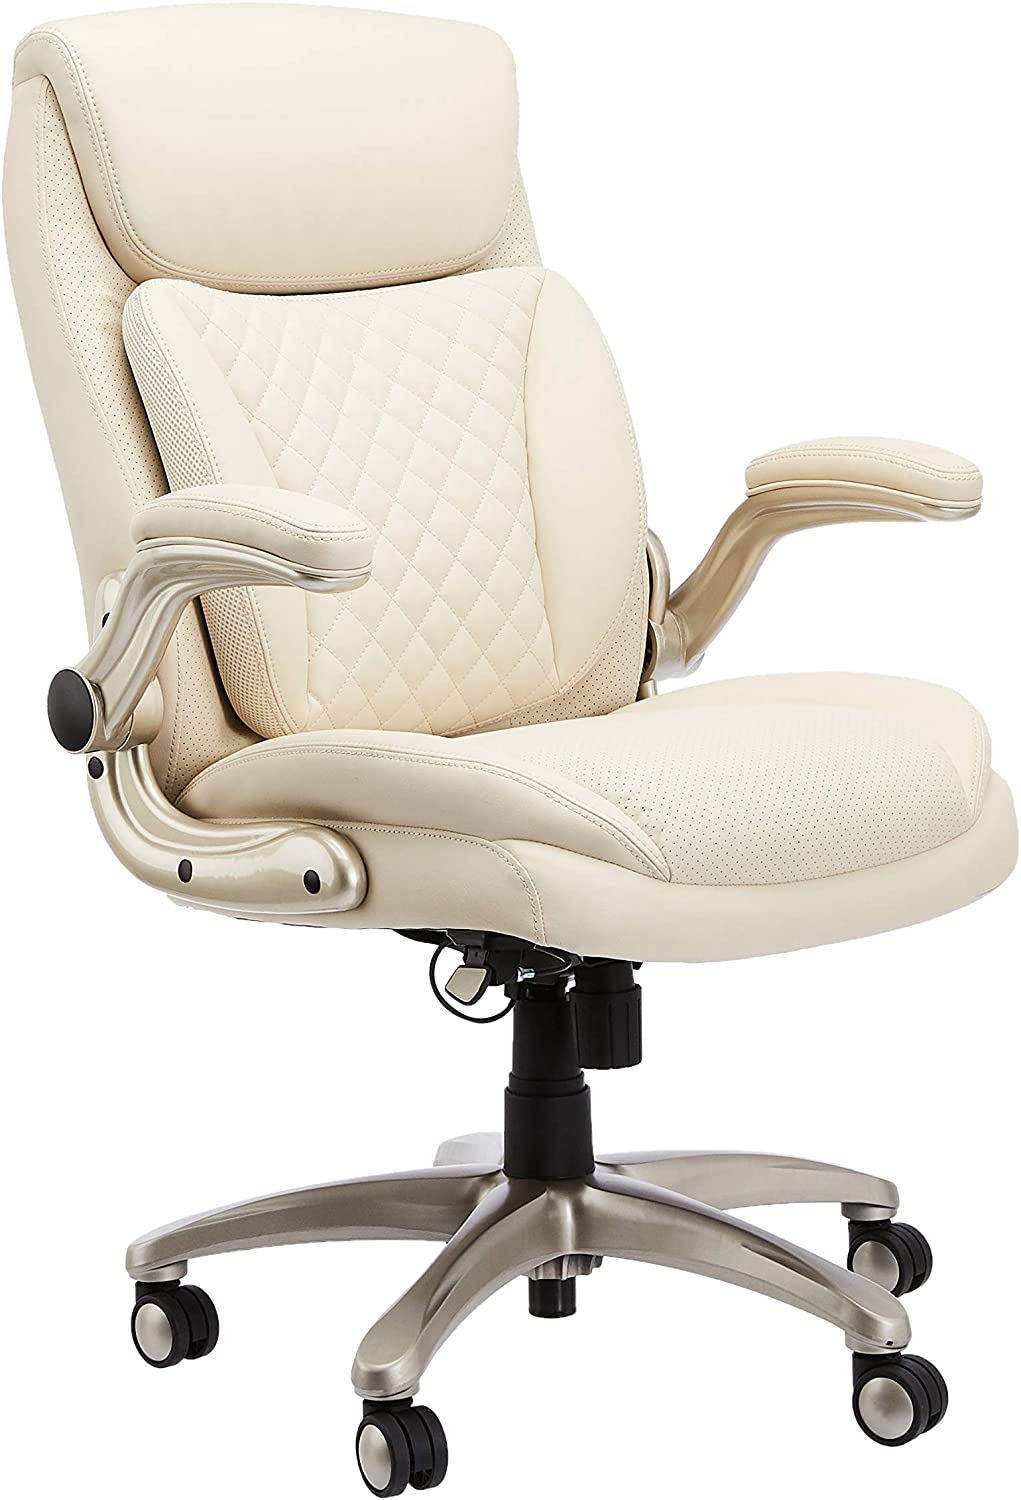 AmazonCommercial Ergonomic High-Back Executive Chair with Flip-up Armrests and Motive Lumbar Support